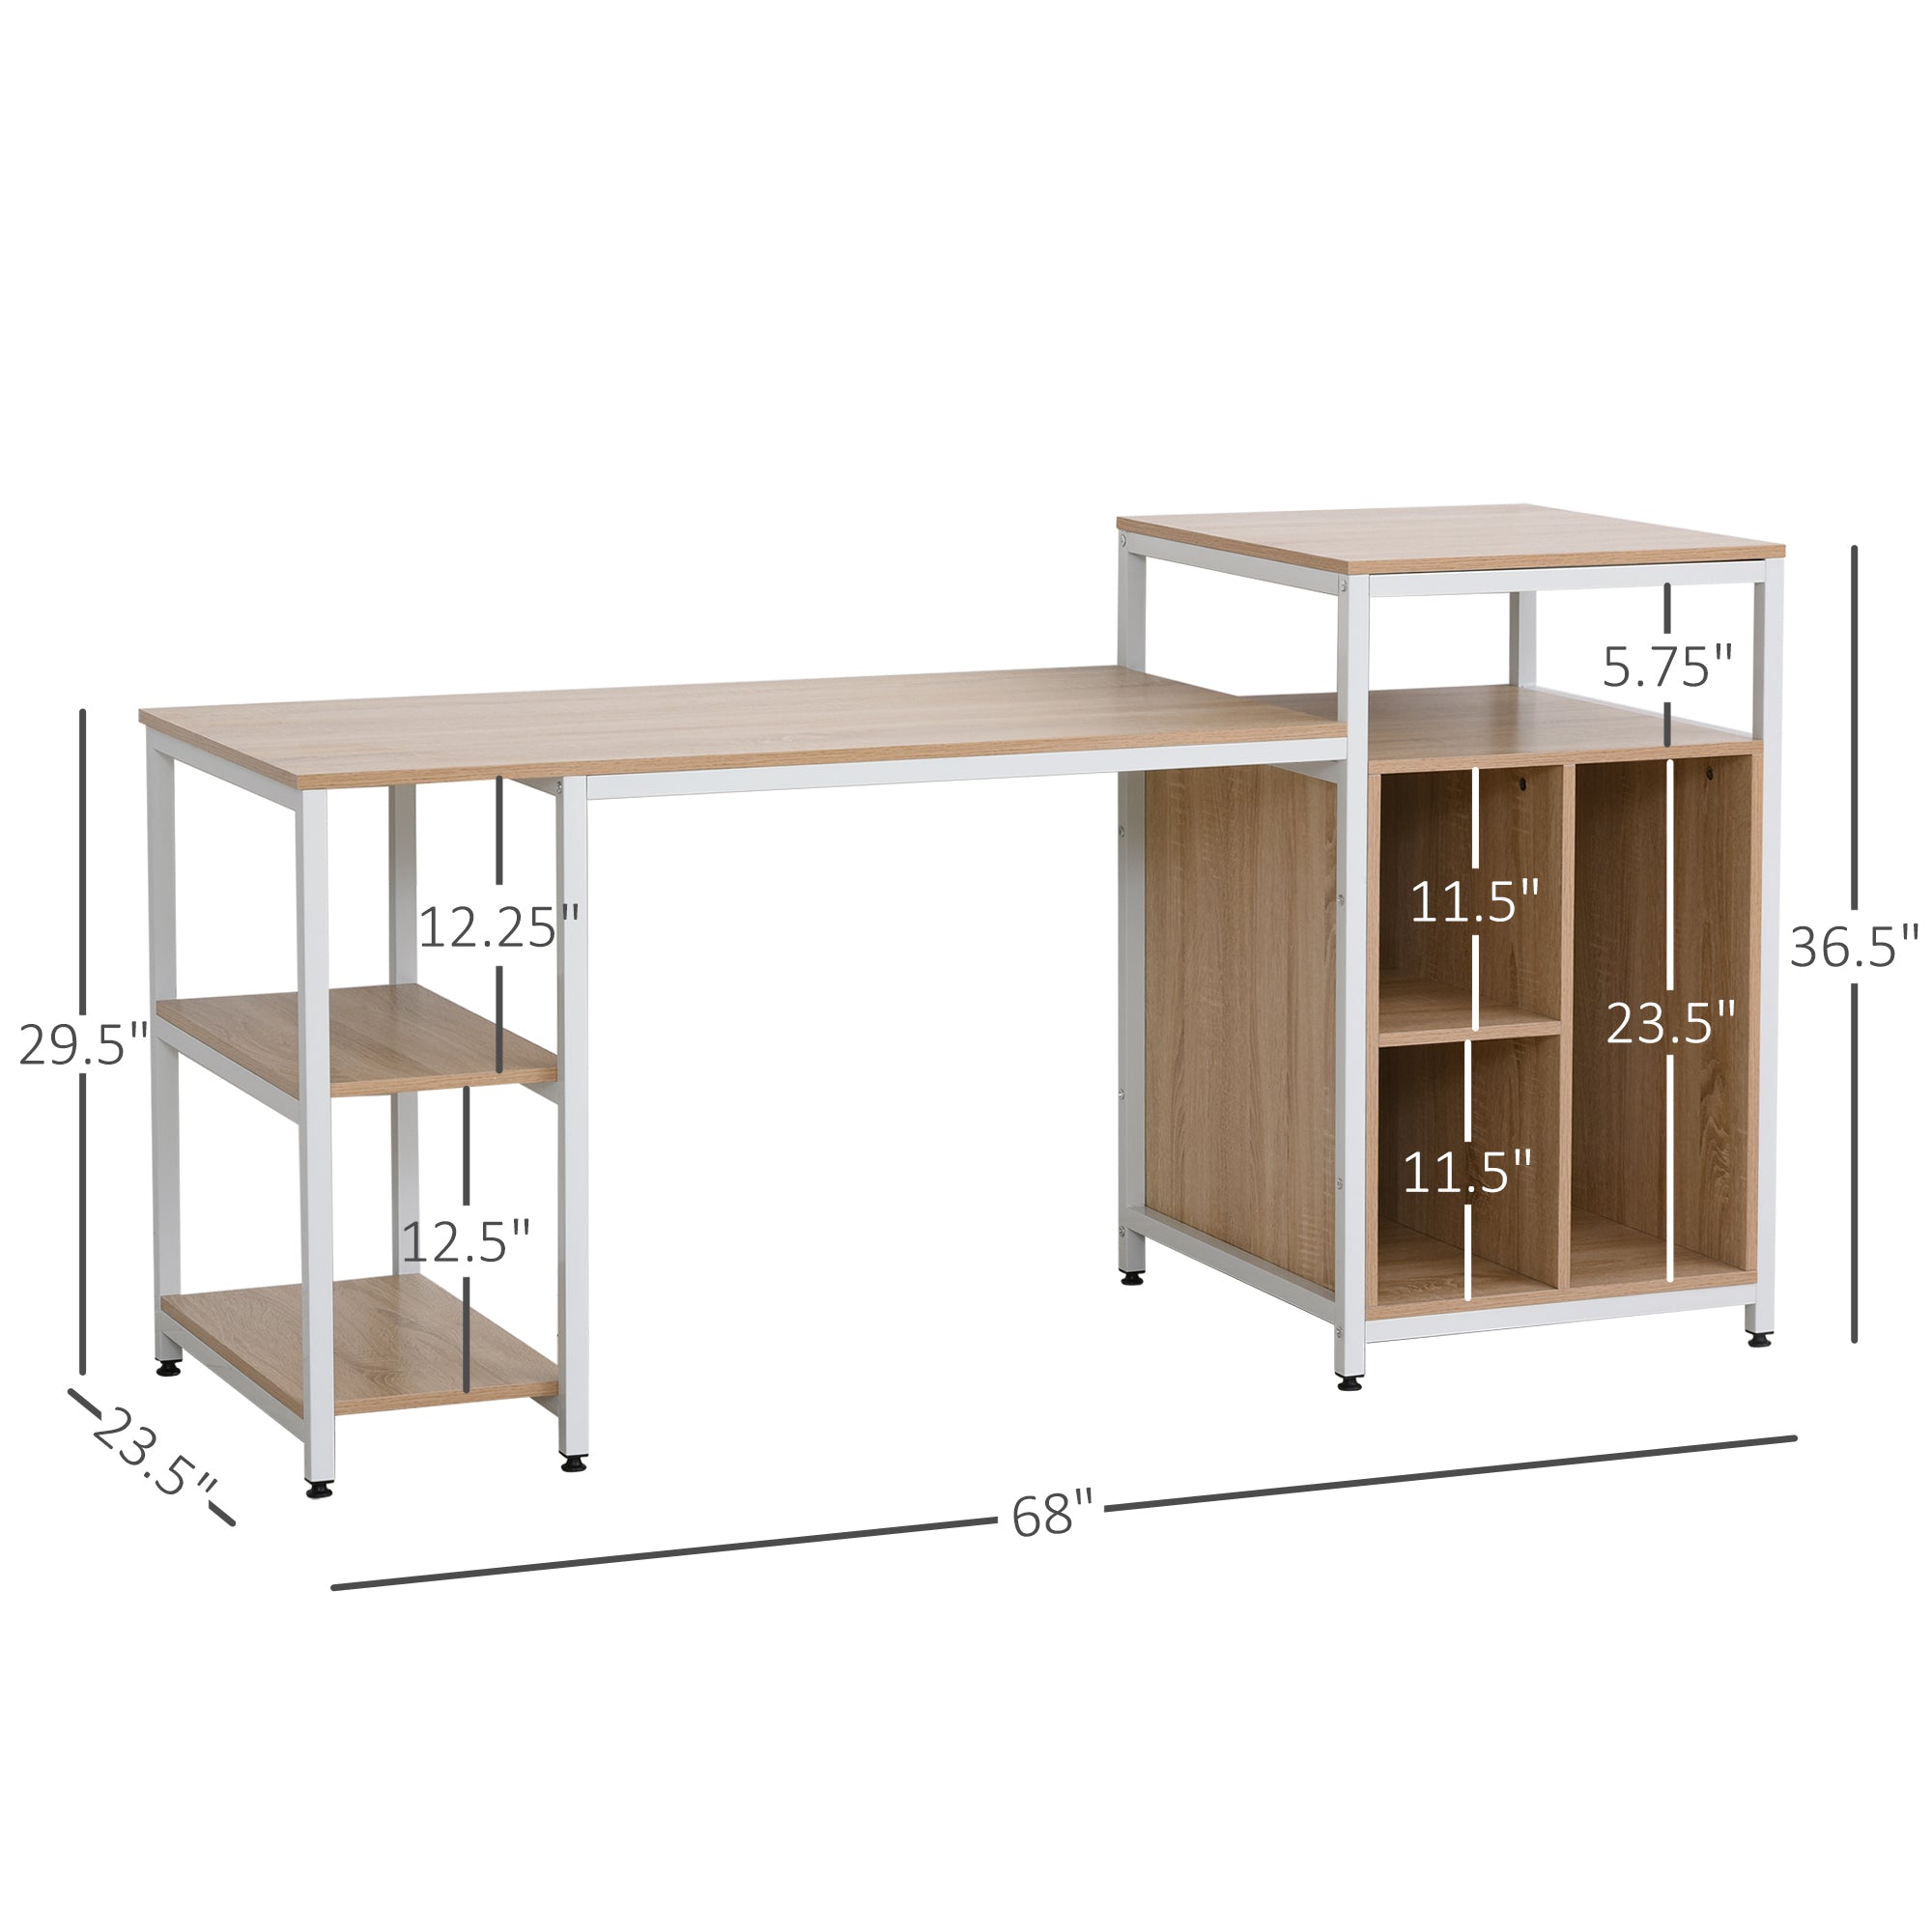 Halifax North America 68 inch Office Table Computer 36.5 High Desk Workstation Bookshelf with CPU Stand | Mathis Home